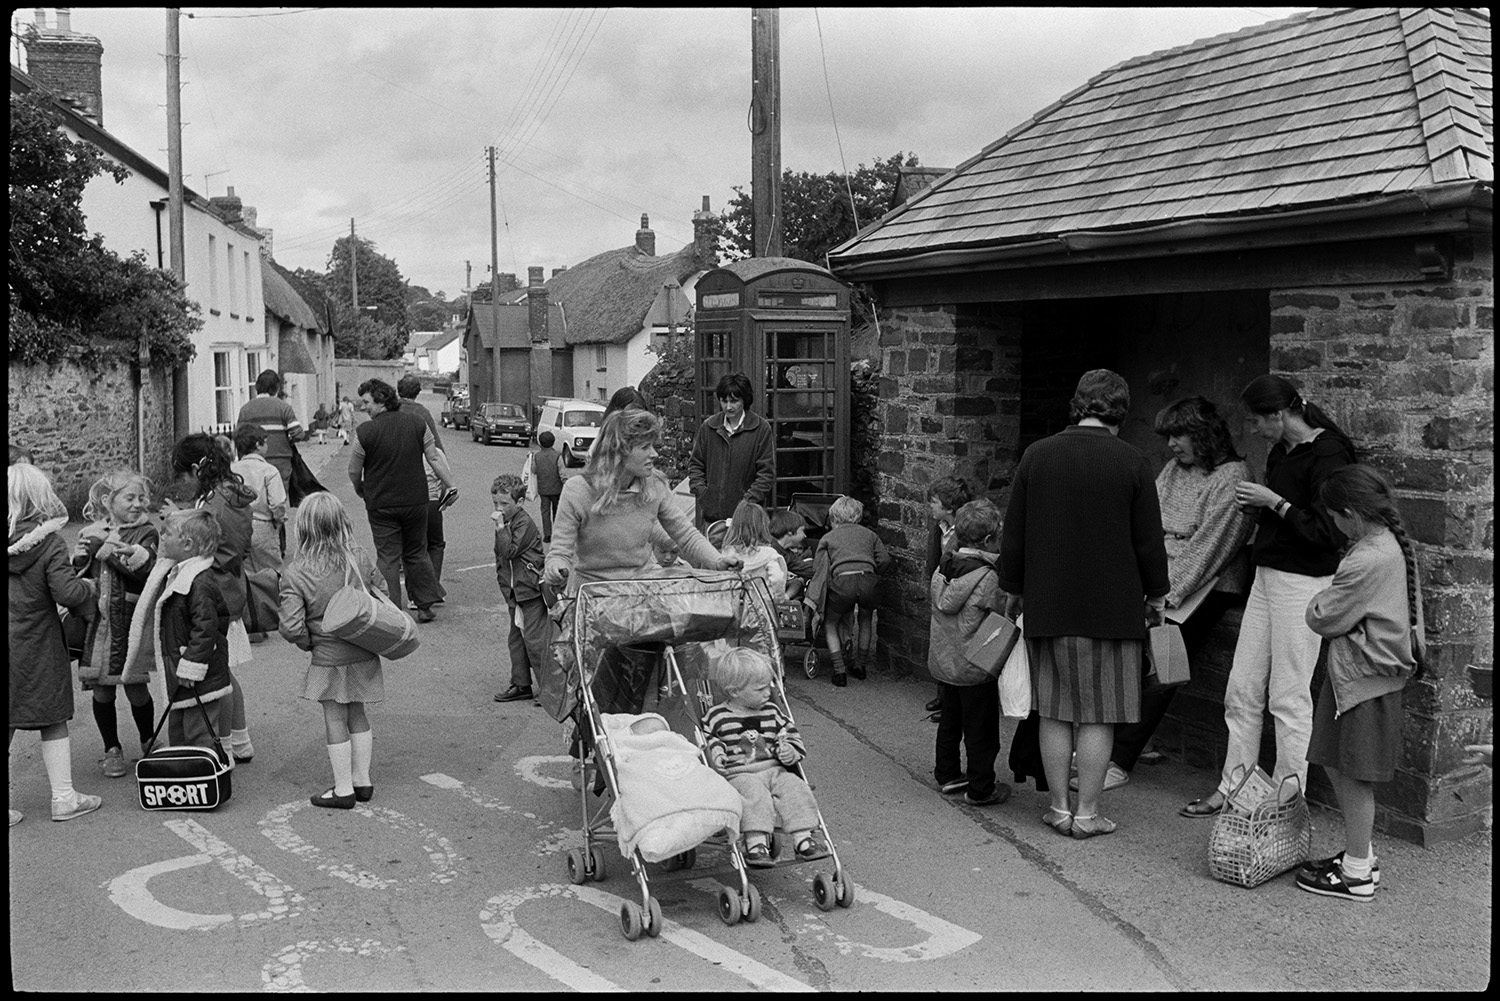 Women, mothers and children after school, pushchair. 
[Mothers greeting children after school outside a bus shelter and telephone box in Dolton. A woman in the foreground is pushing a double pram.]